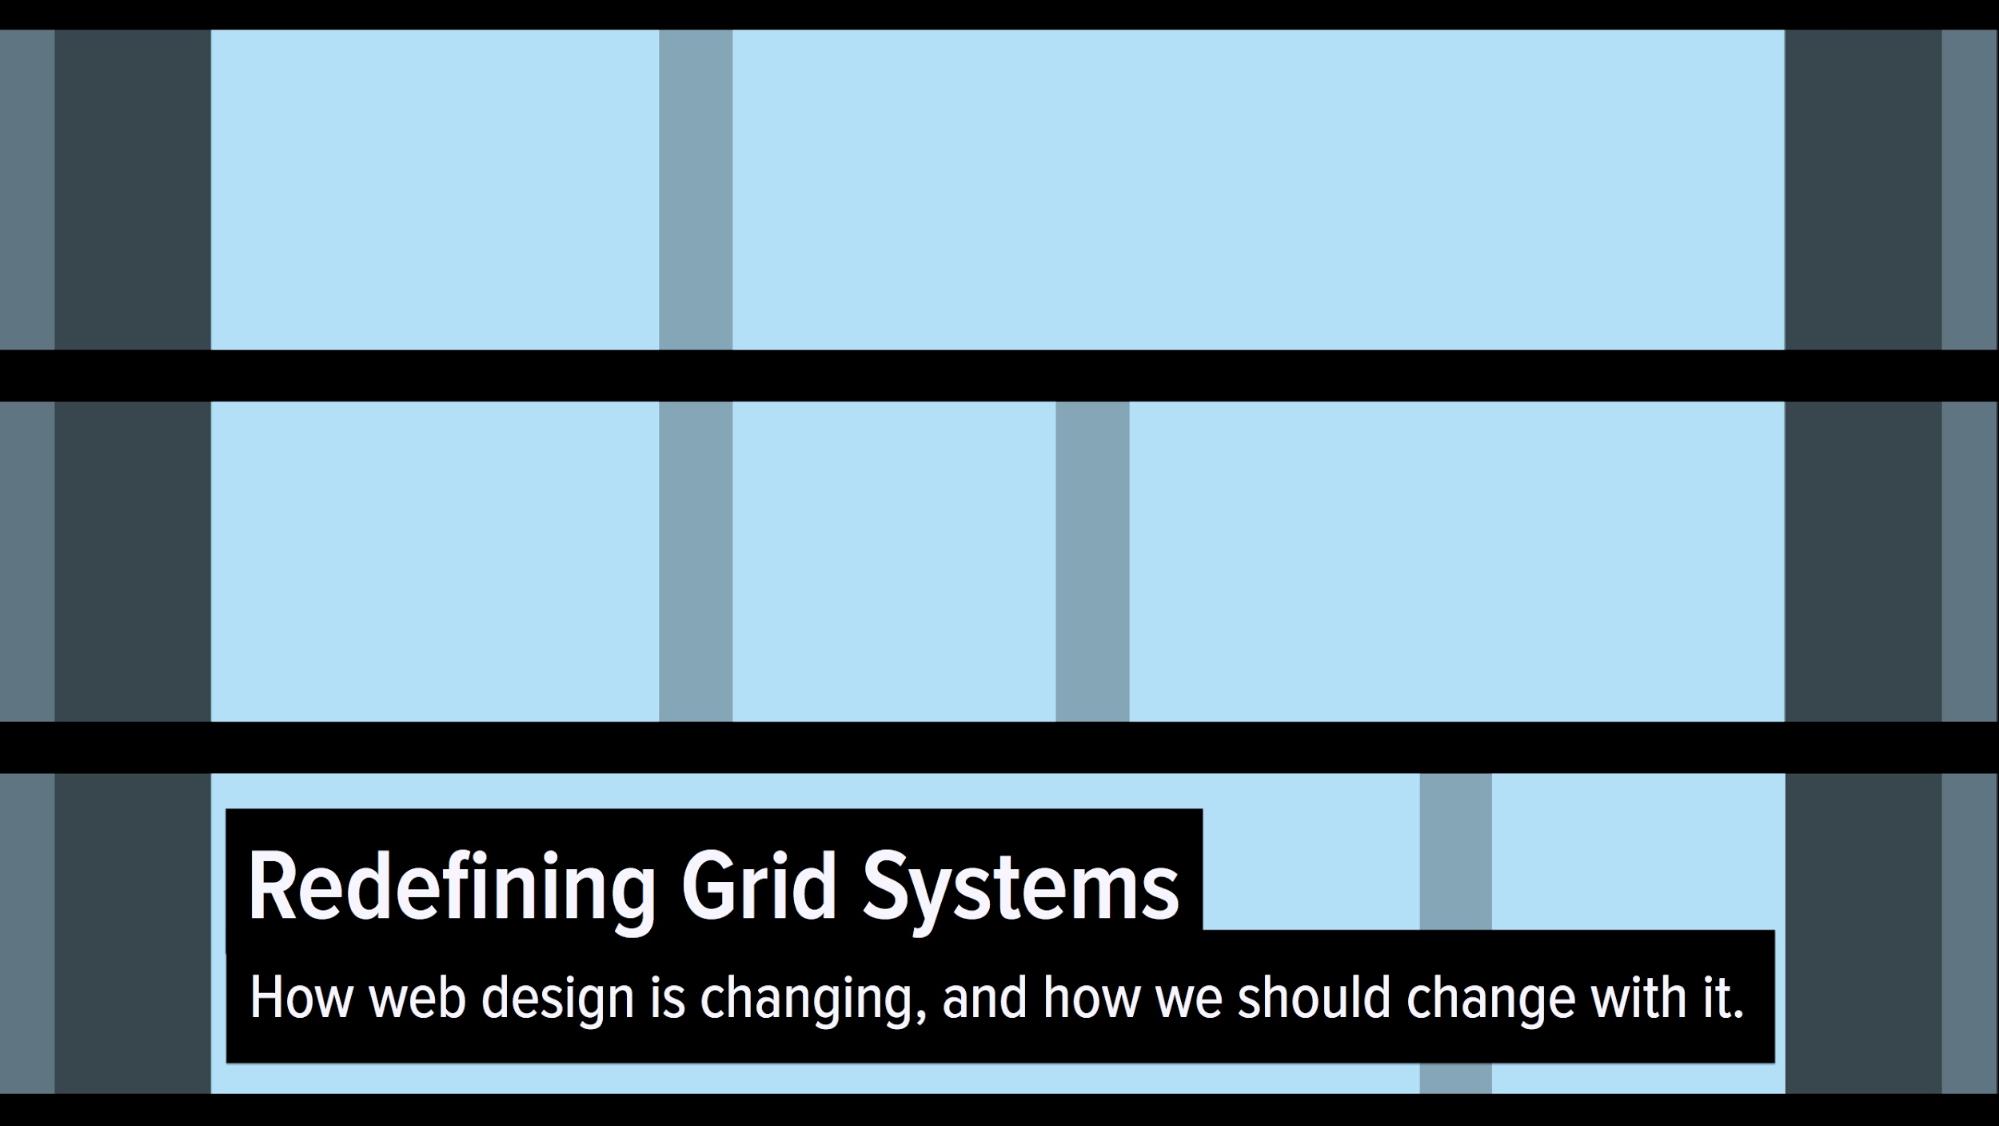 Redefining the Grid System.